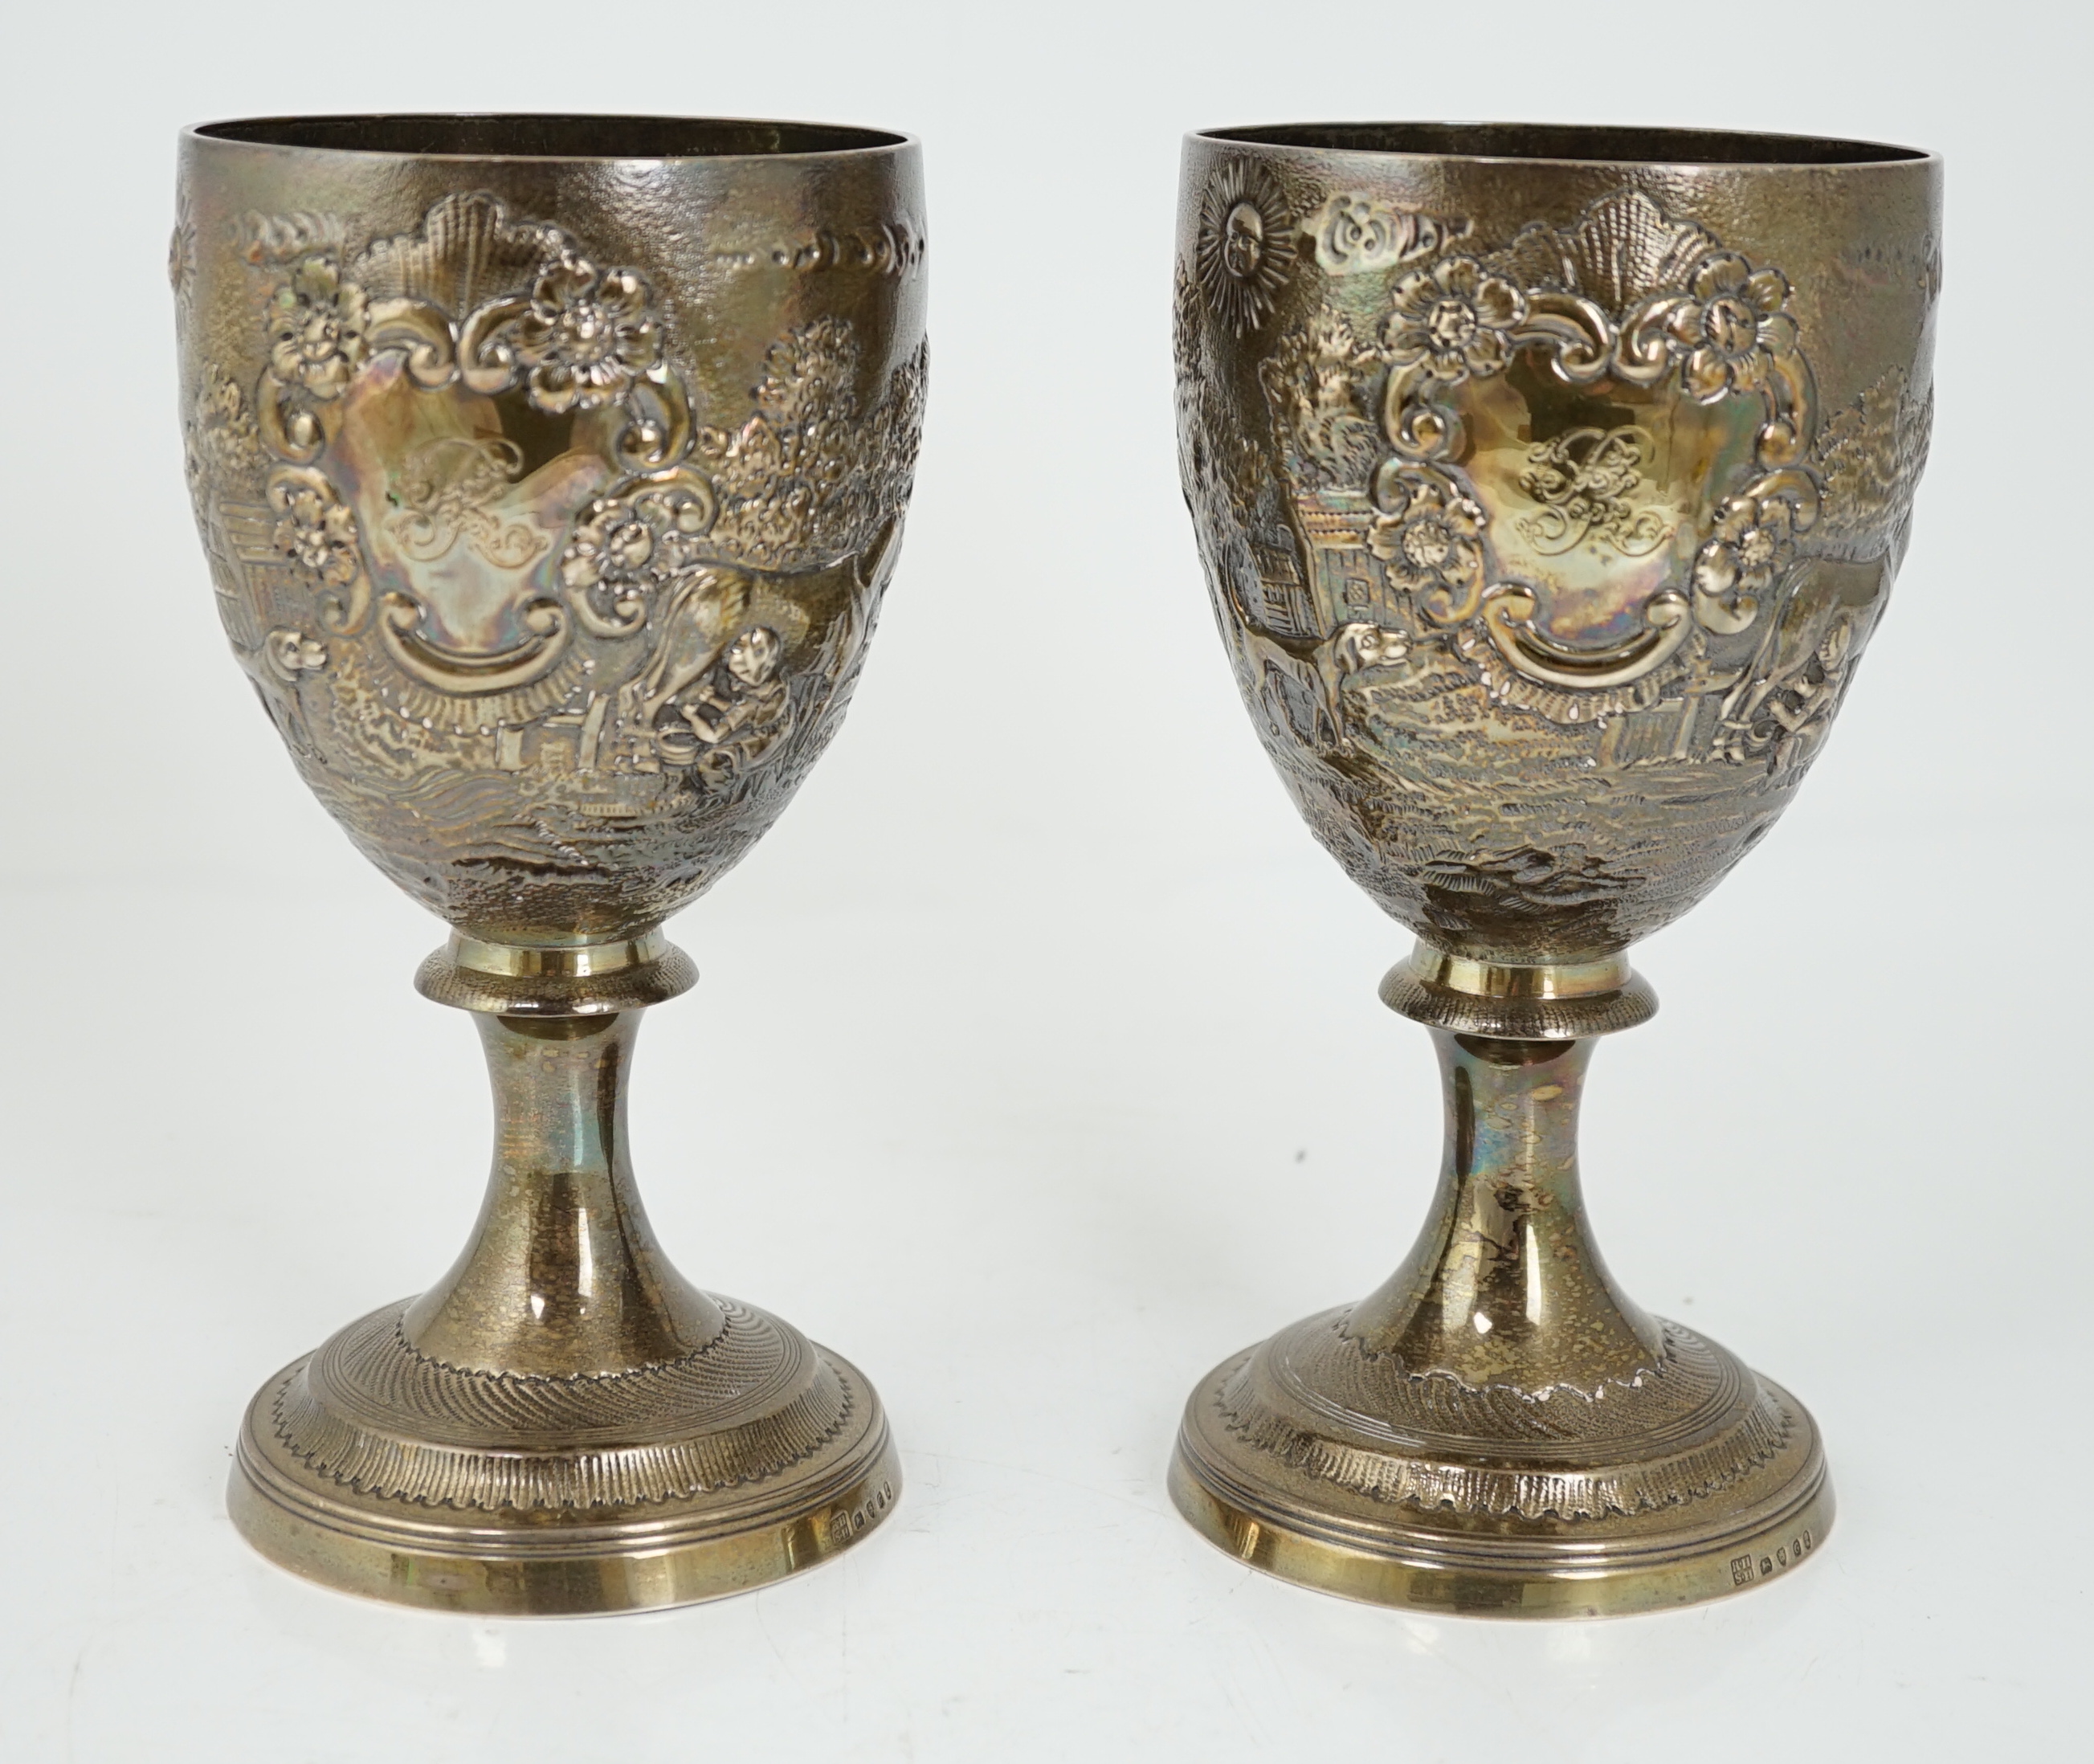 A pair of George III silver goblets, by Robert & Samuel Hennel